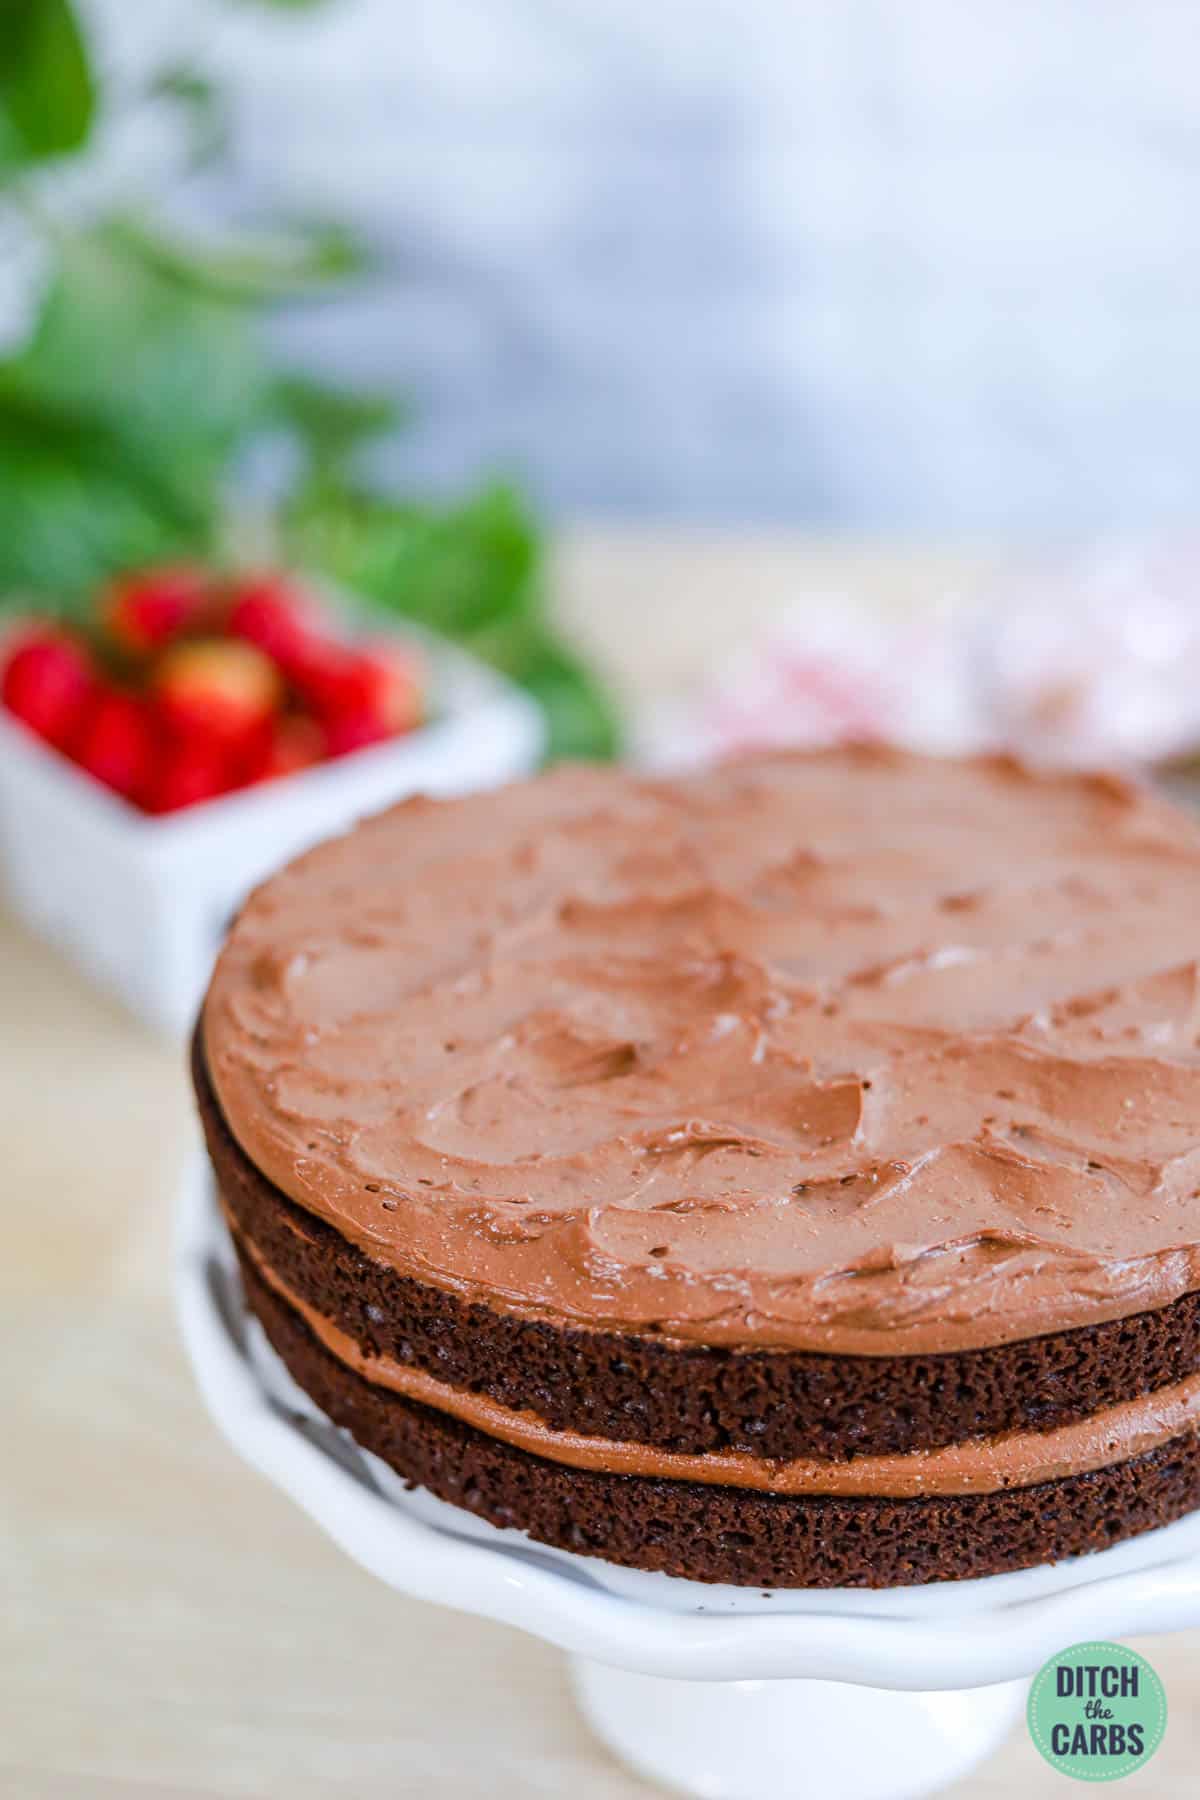 keto chocolate frosting on a 2 layered cake